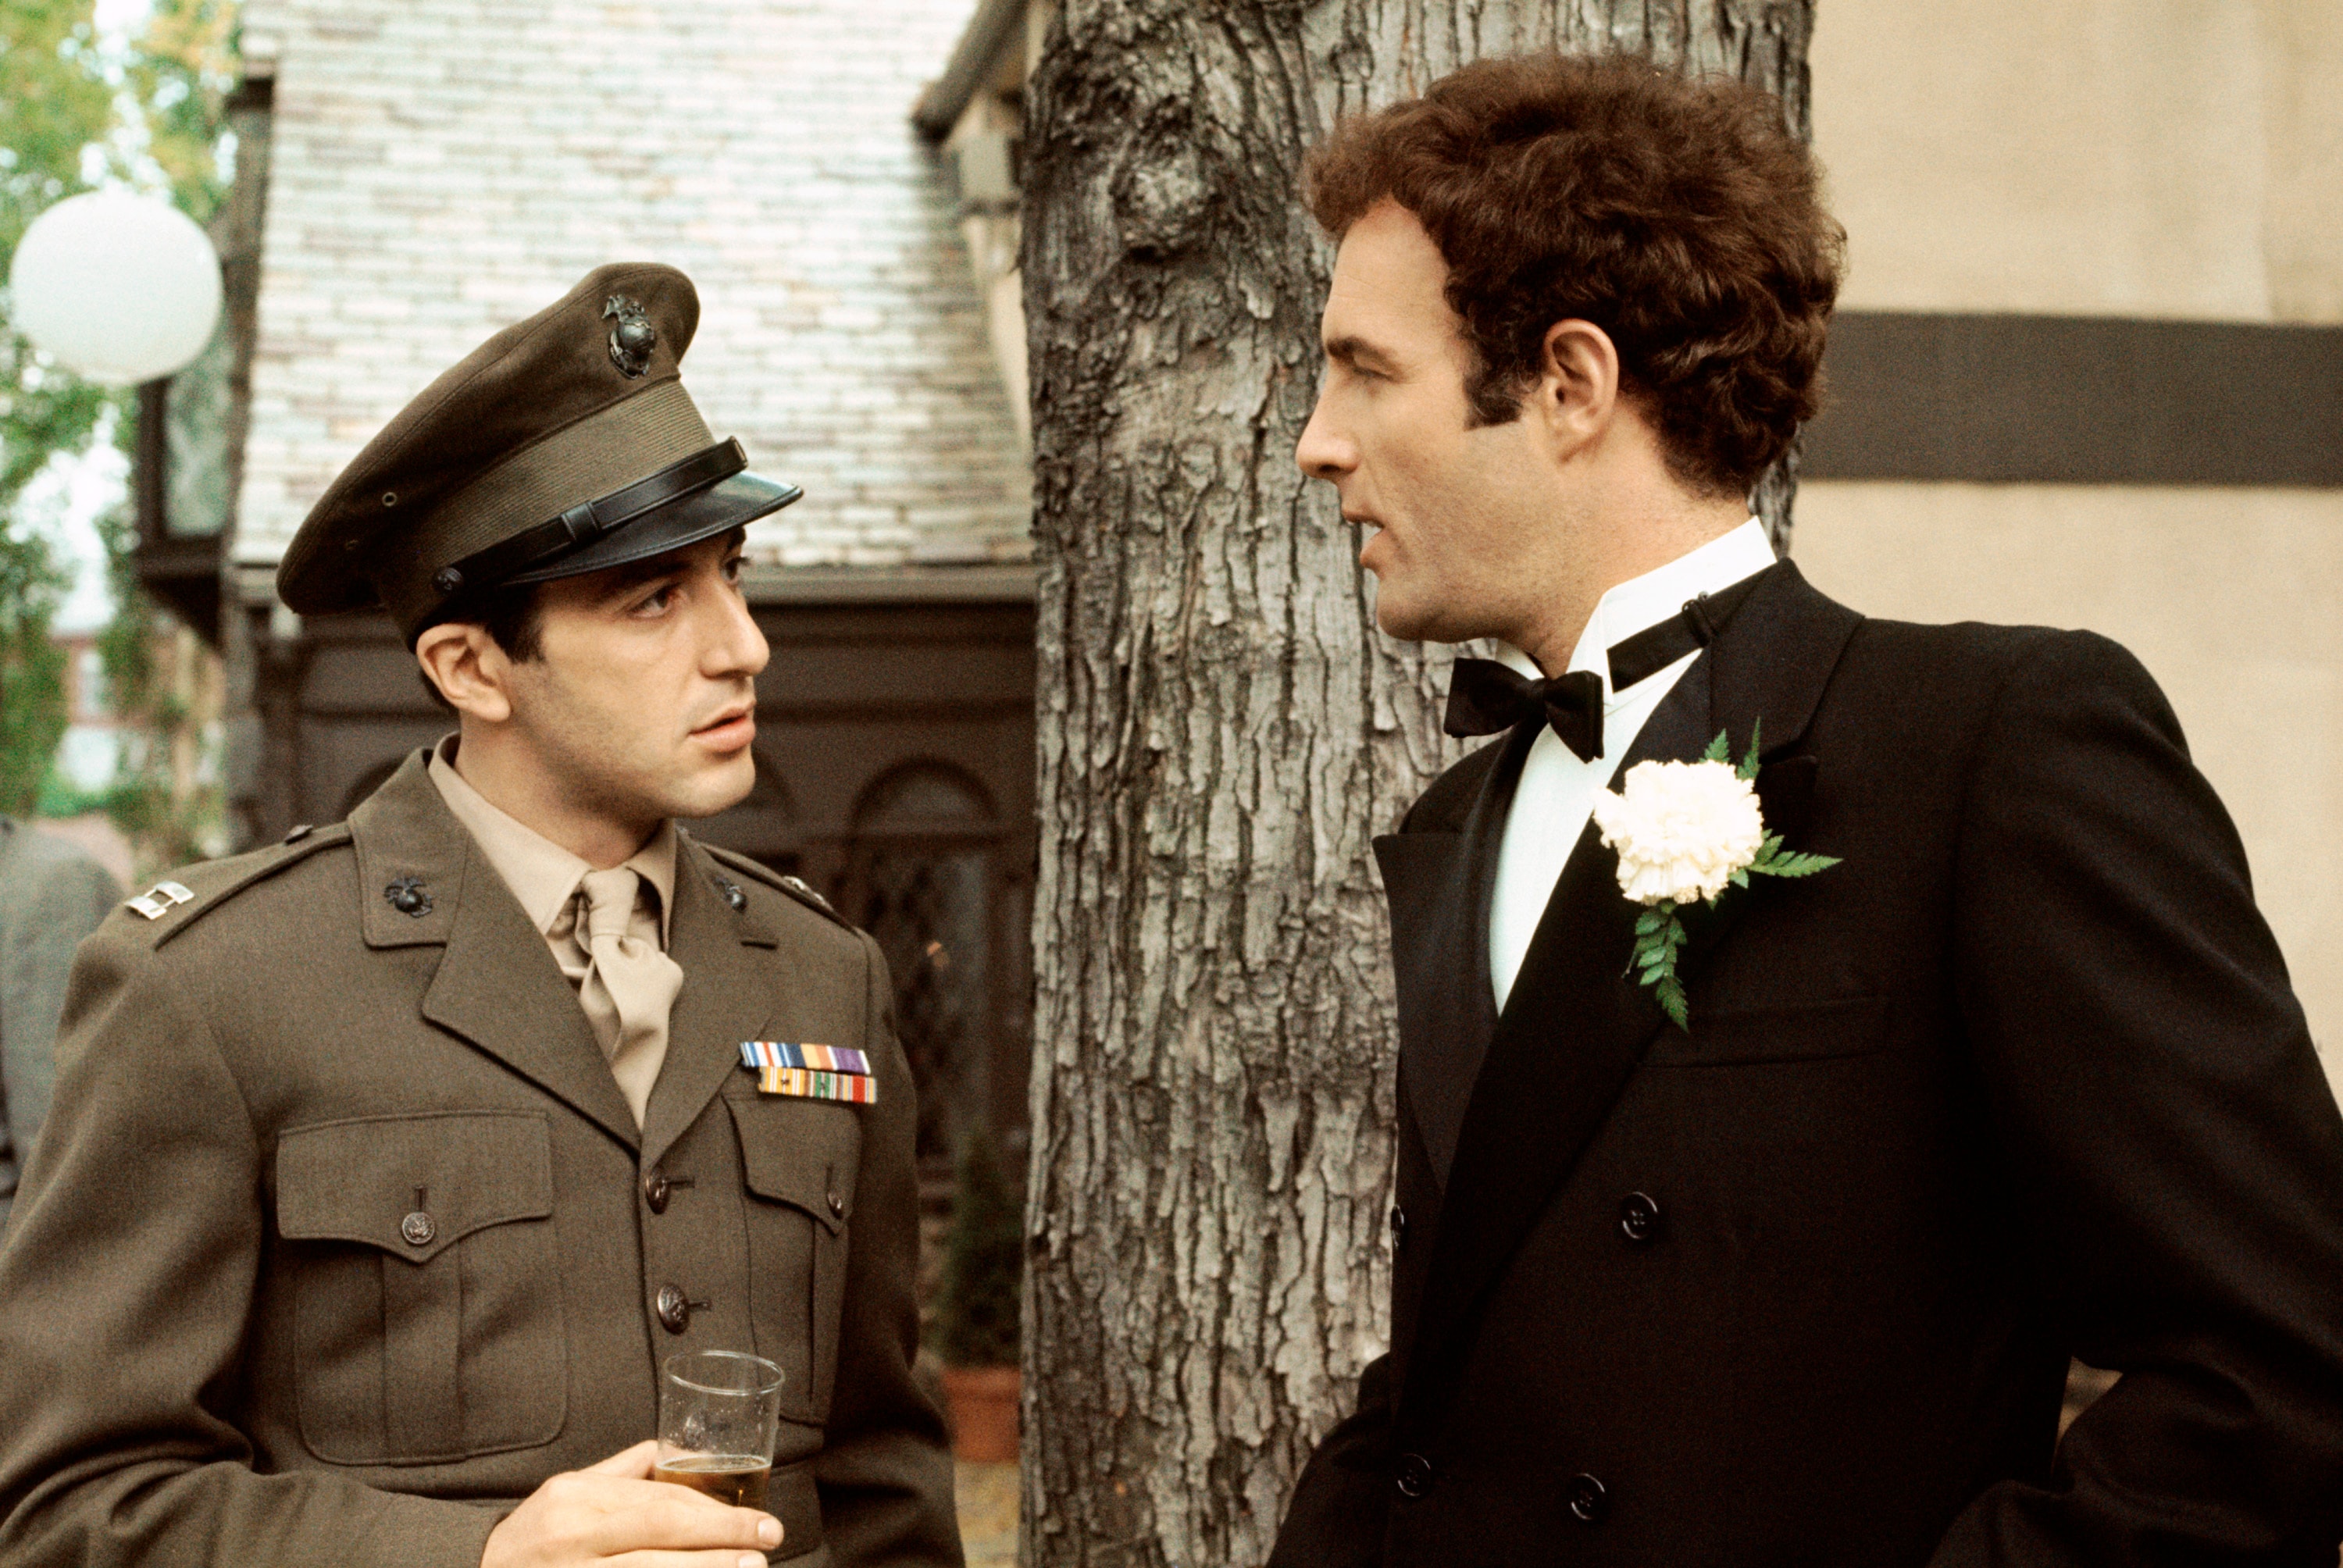 Al Pacino as Michael Corleone (left) and James Caan as Sonny Corleone (right) in a scene from The Godfather. (Paramount Pictures via AP)(AP)